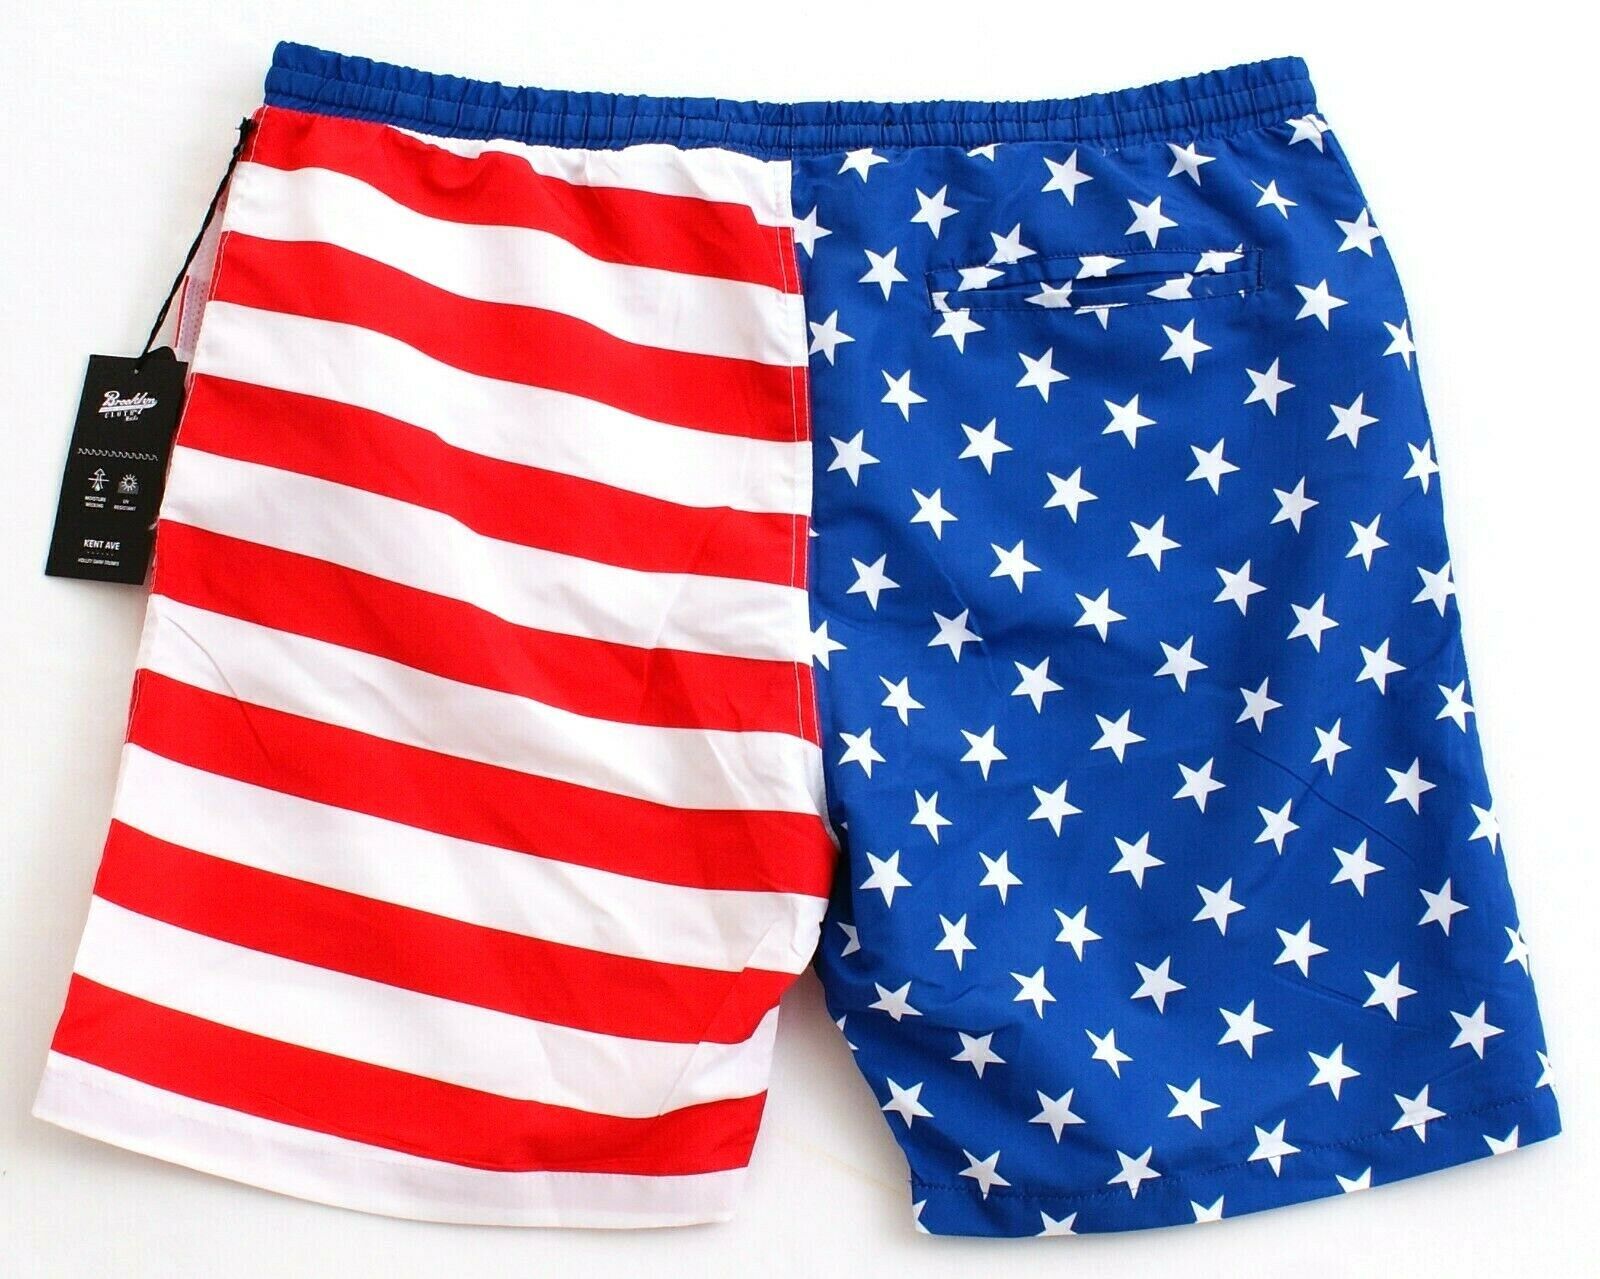 Brooklyn Cloth Red White & Blue Striped Brief Lined Swim Trunks Shorts ...